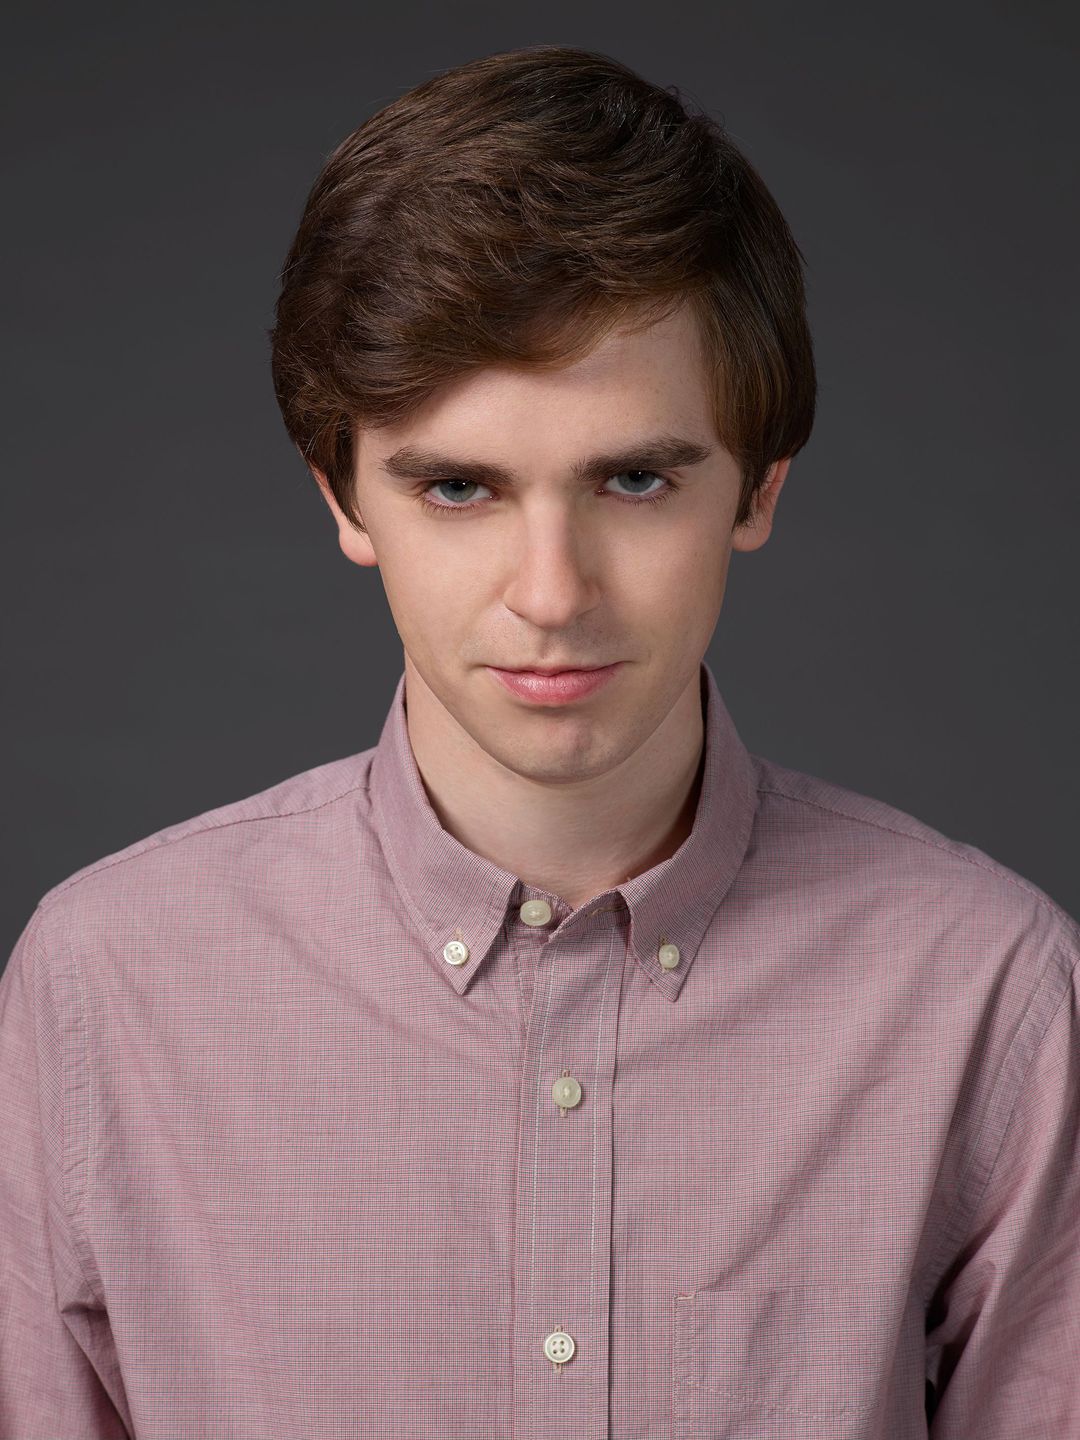 Freddie Highmore who is his mother